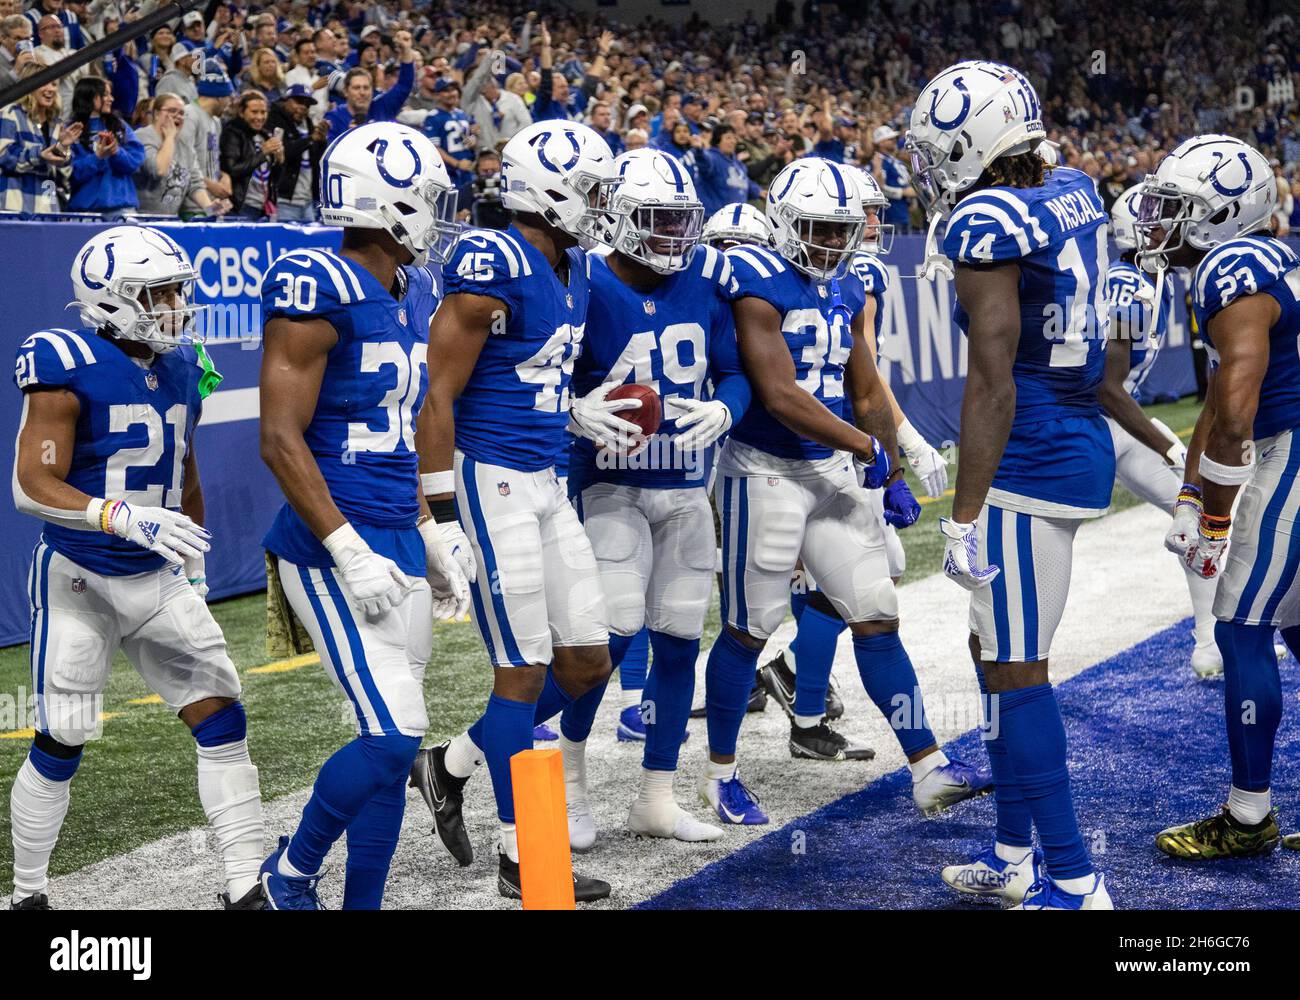 November 14, 2021: Indianapolis Colts players celebrate after a touchdown  by Indianapolis Colts linebacker E.J. Speed (45) during NFL football game  action between the Jacksonville Jaguars and the Indianapolis Colts at Lucas